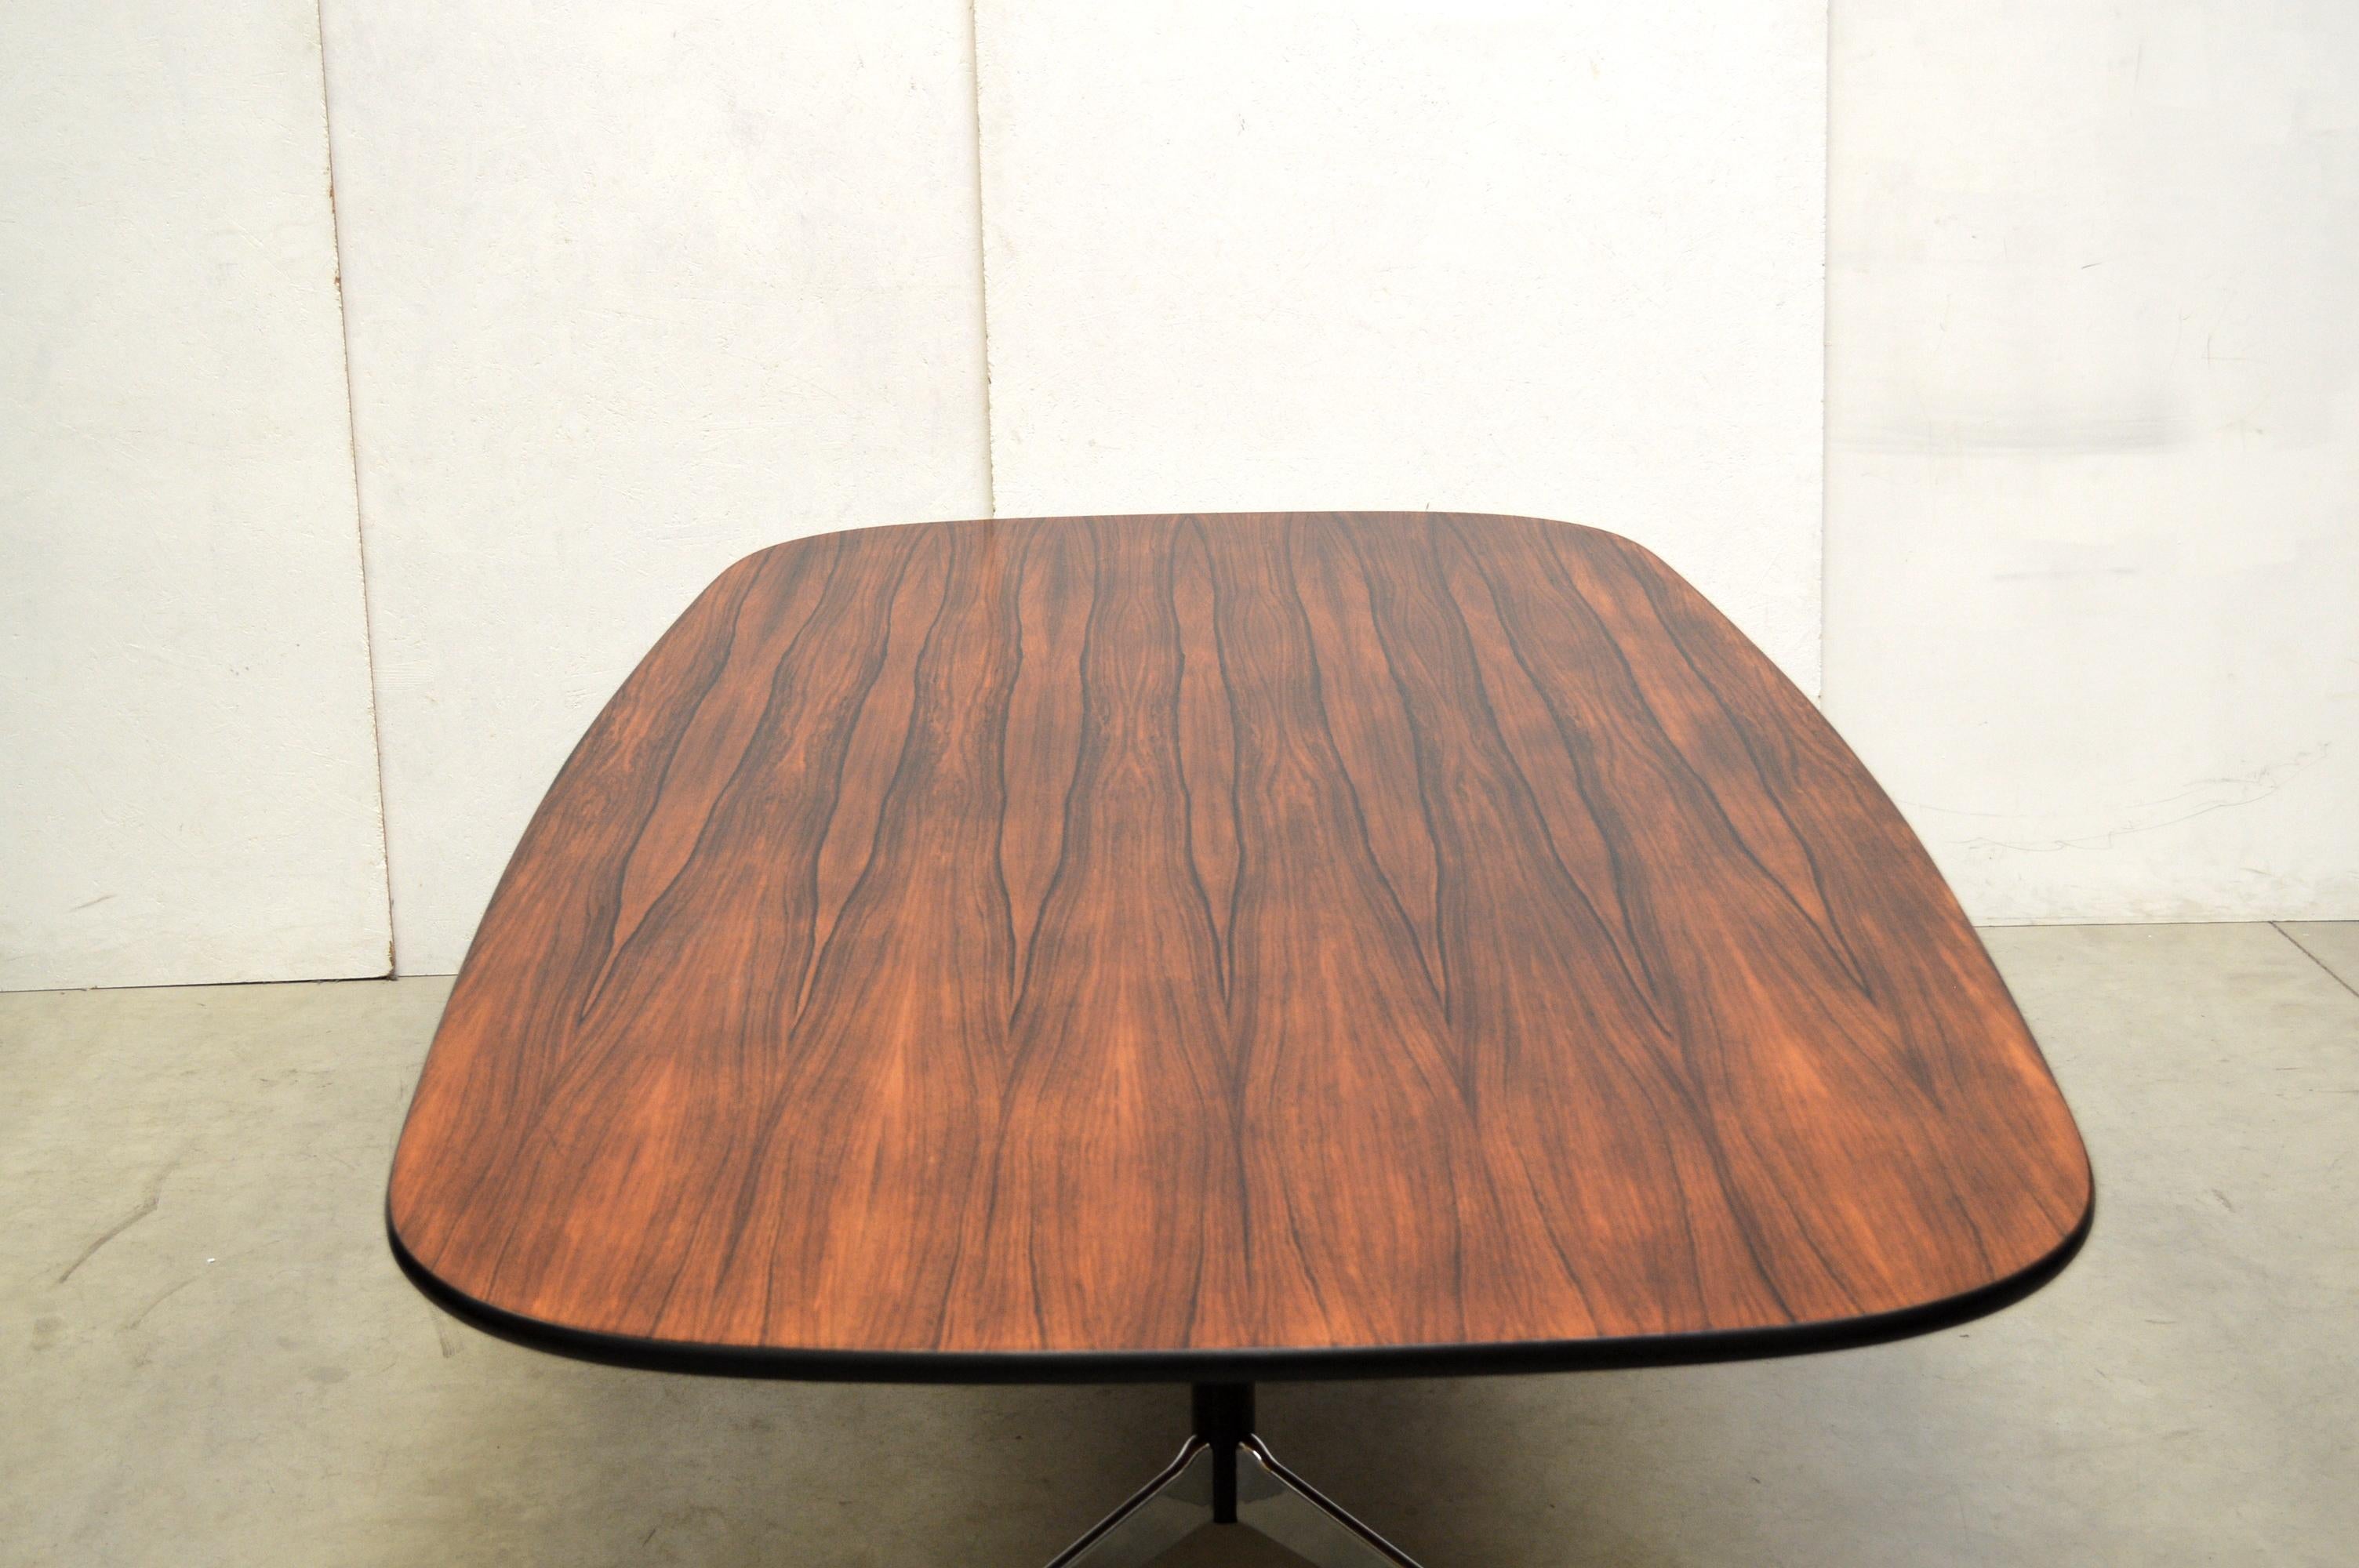 American 8-Foot Segmented Table by Charles Eames for Herman Miller 1970s